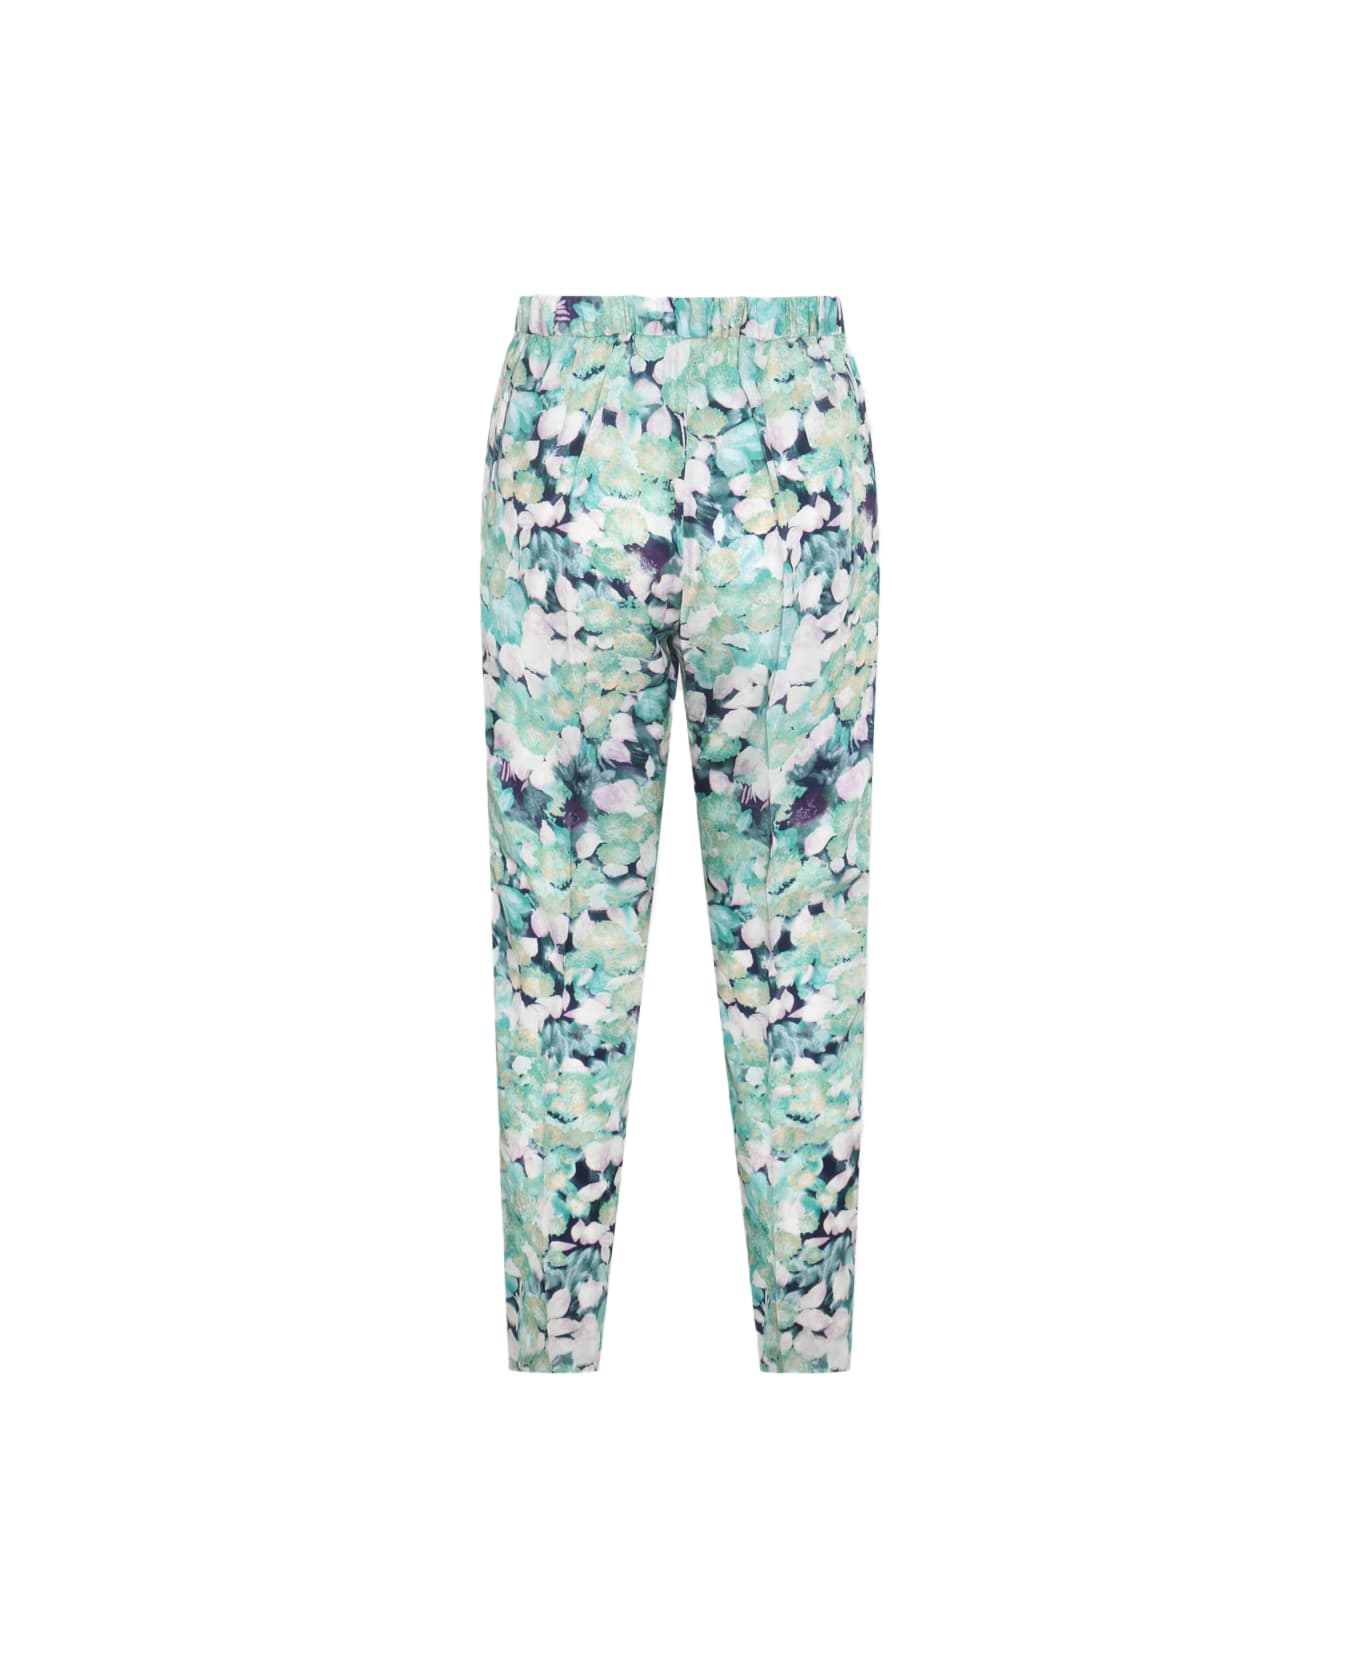 Dries Van Noten Turquoise And Blue Floreal Pants - TURQUOISE